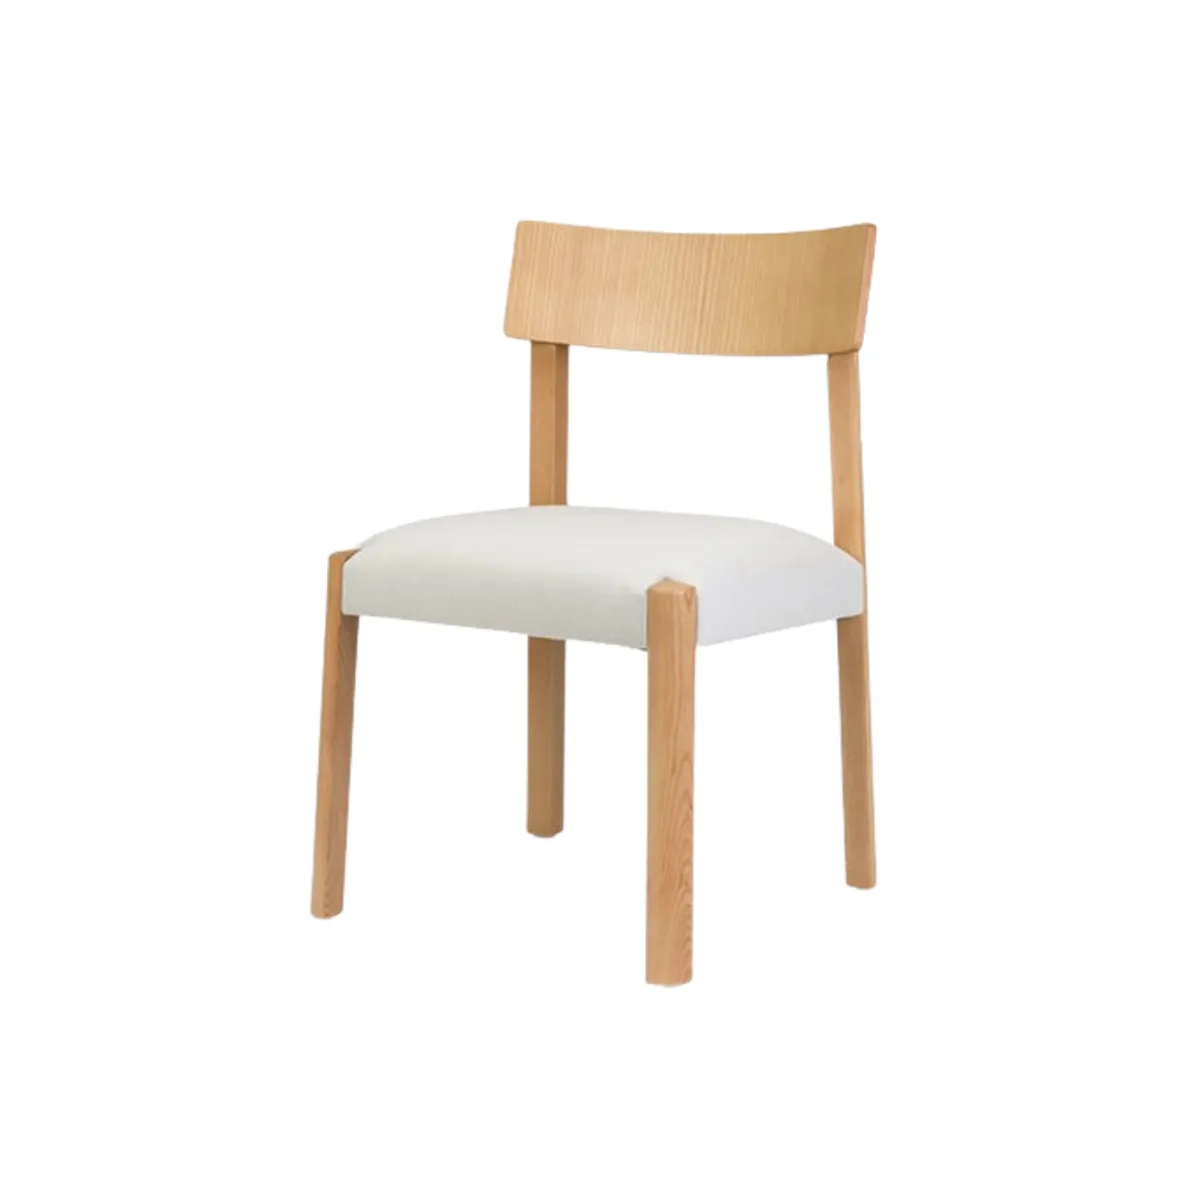 Hatate side chair 1